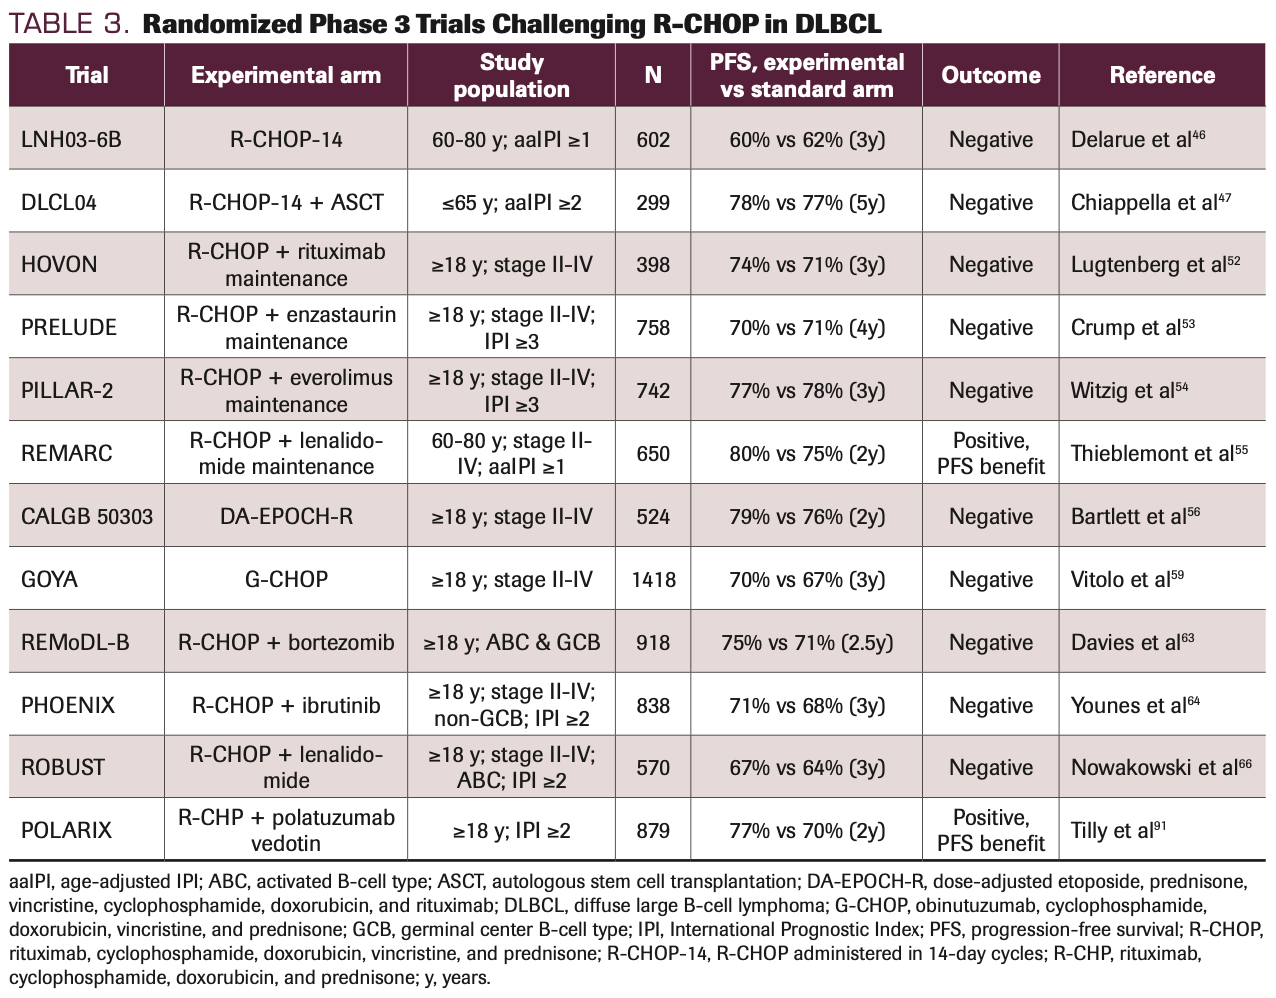 TABLE 3. Randomized Phase 3 Trials Challenging R-CHOP in DLBCL